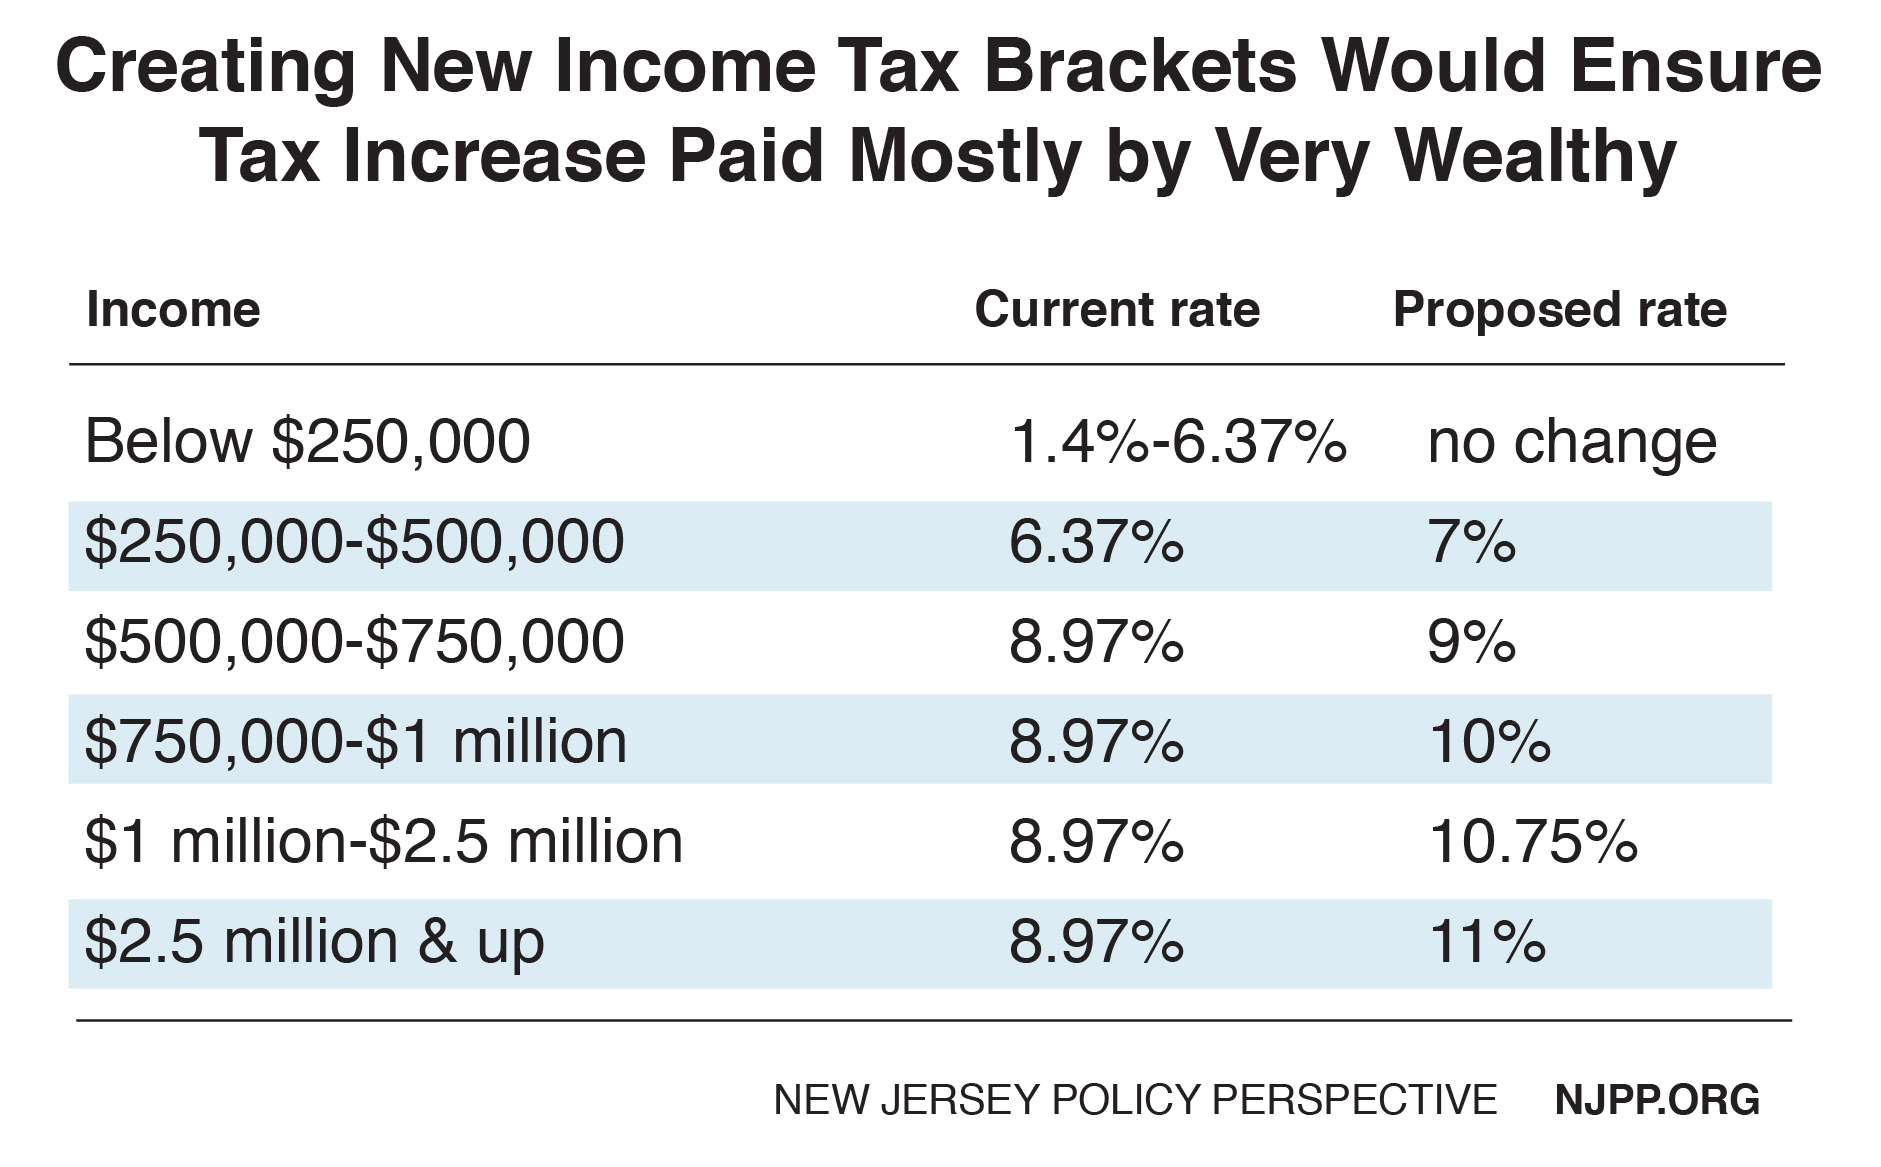 Reforming New Jersey’s Tax Would Help Build Shared Prosperity